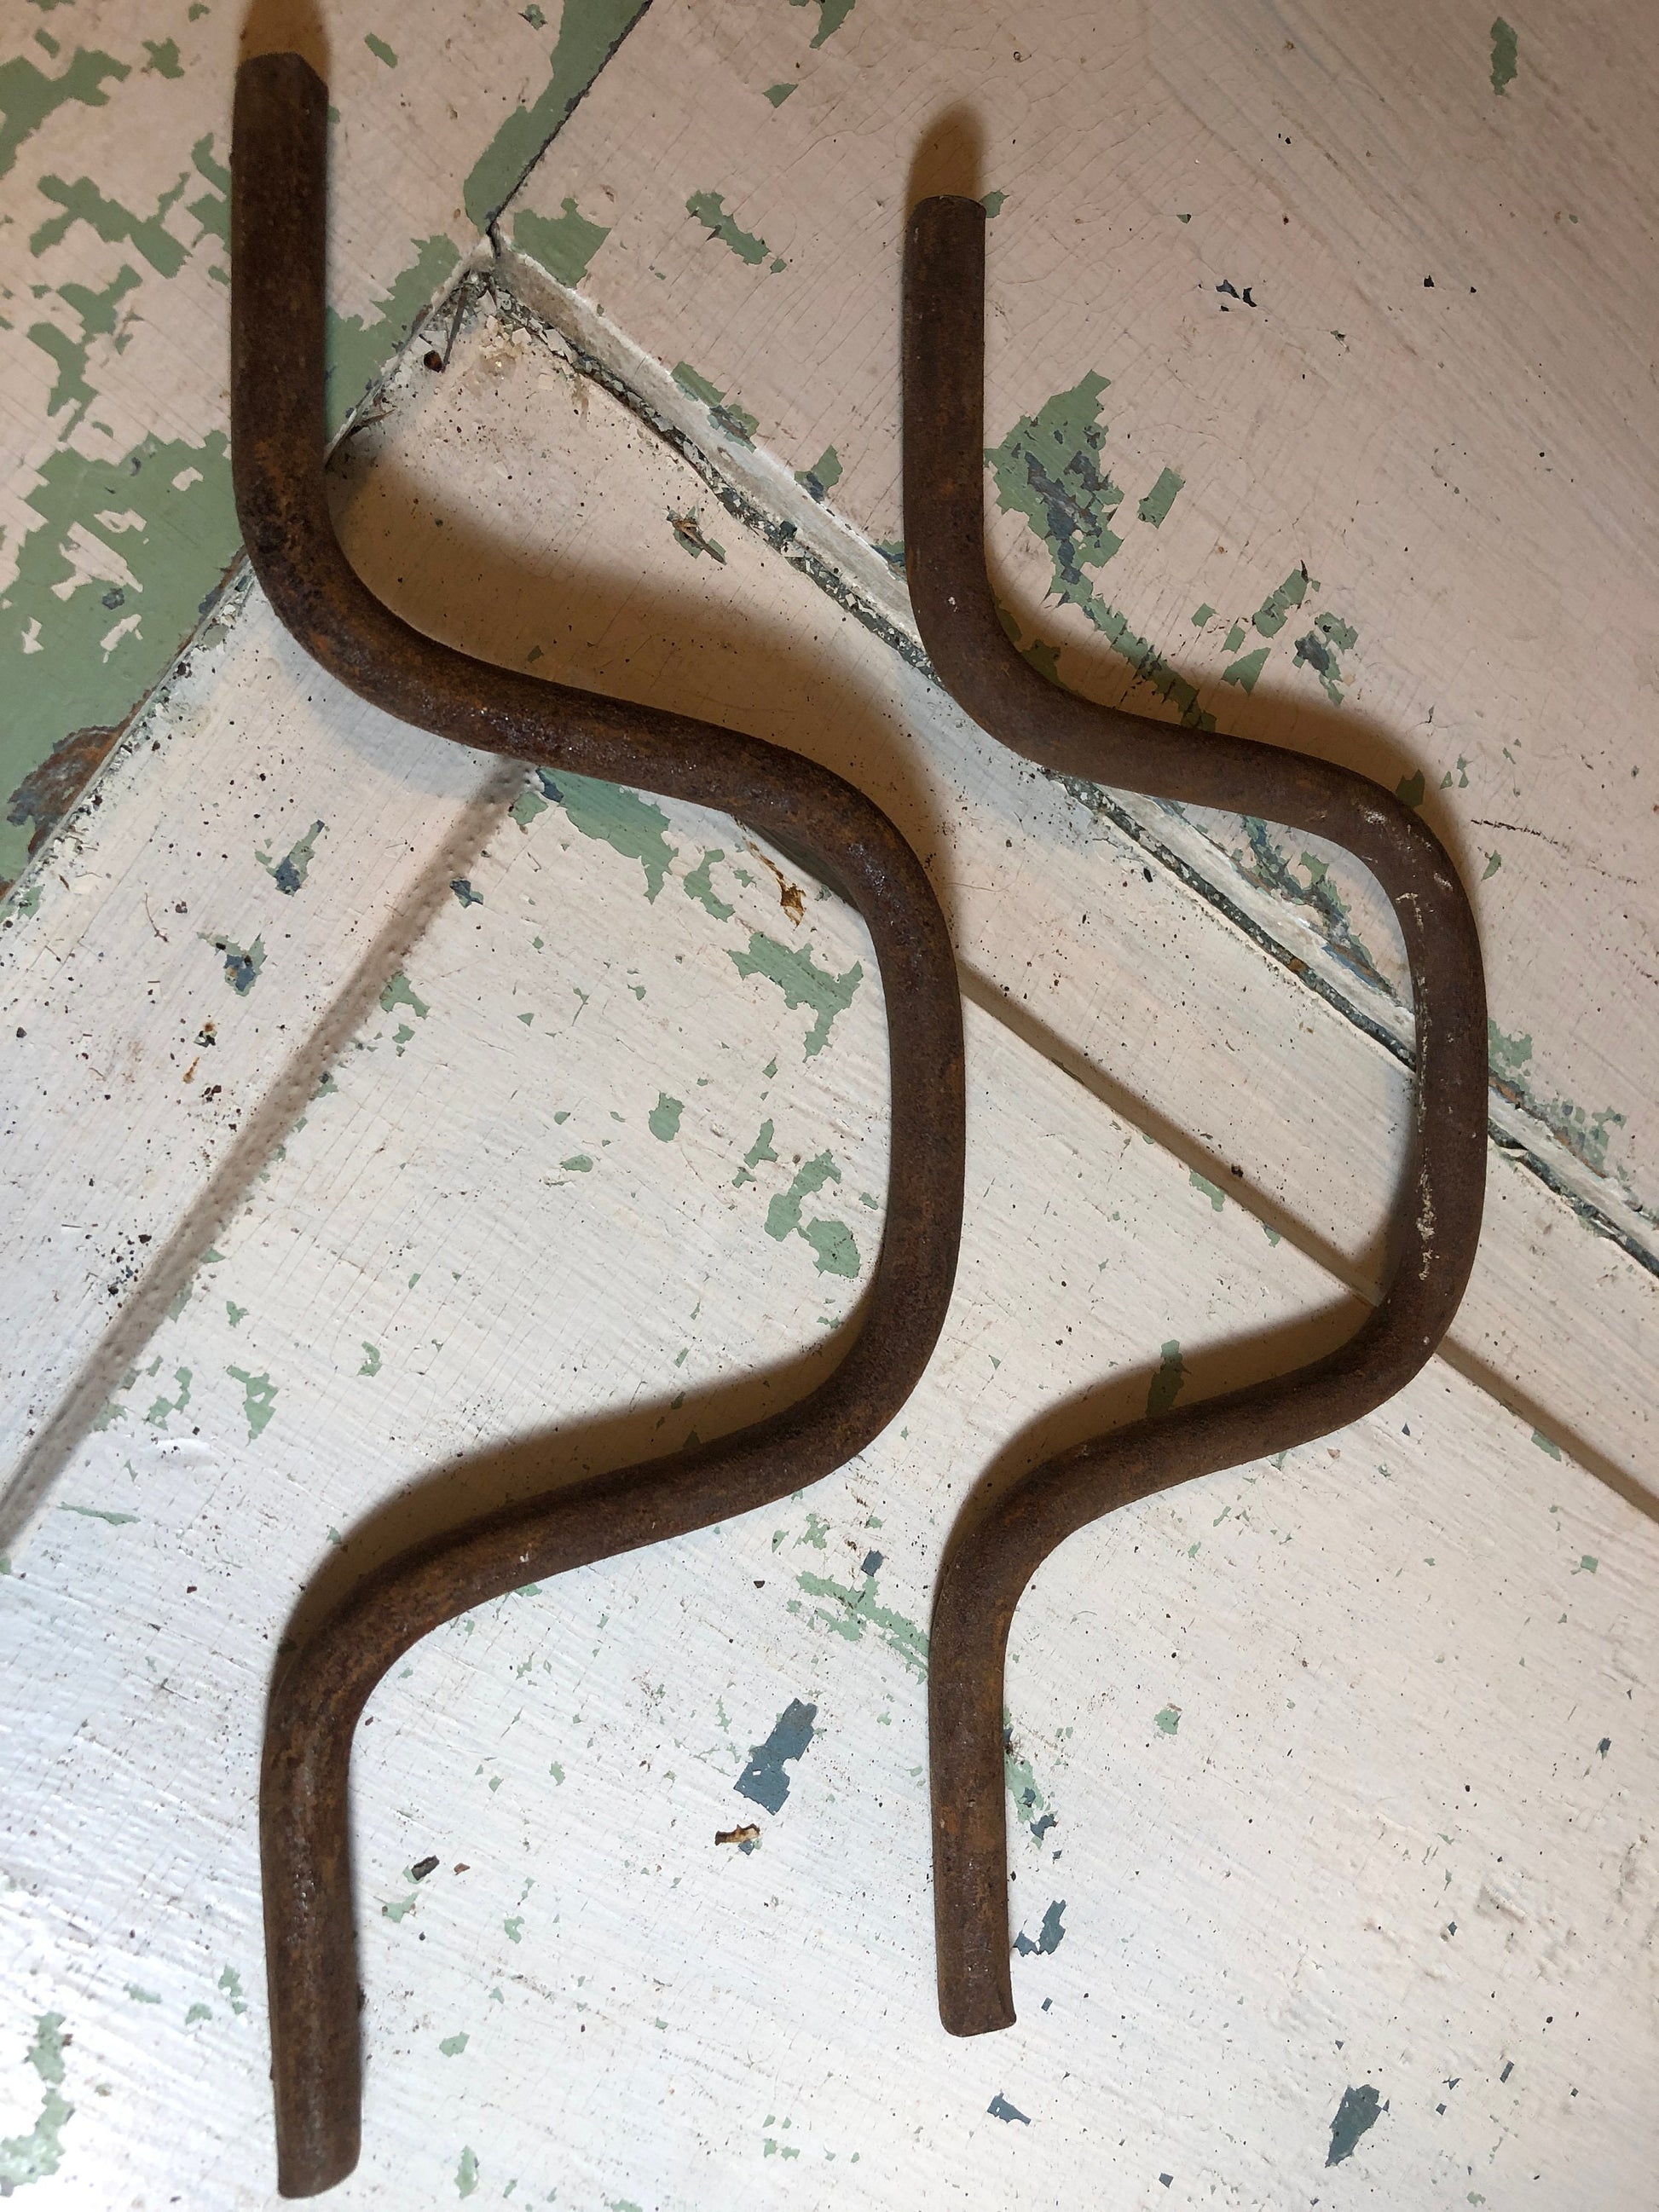 Pair of Vintage Bent Iron Brackets, Rustic Decor, Imagine what you can do with these